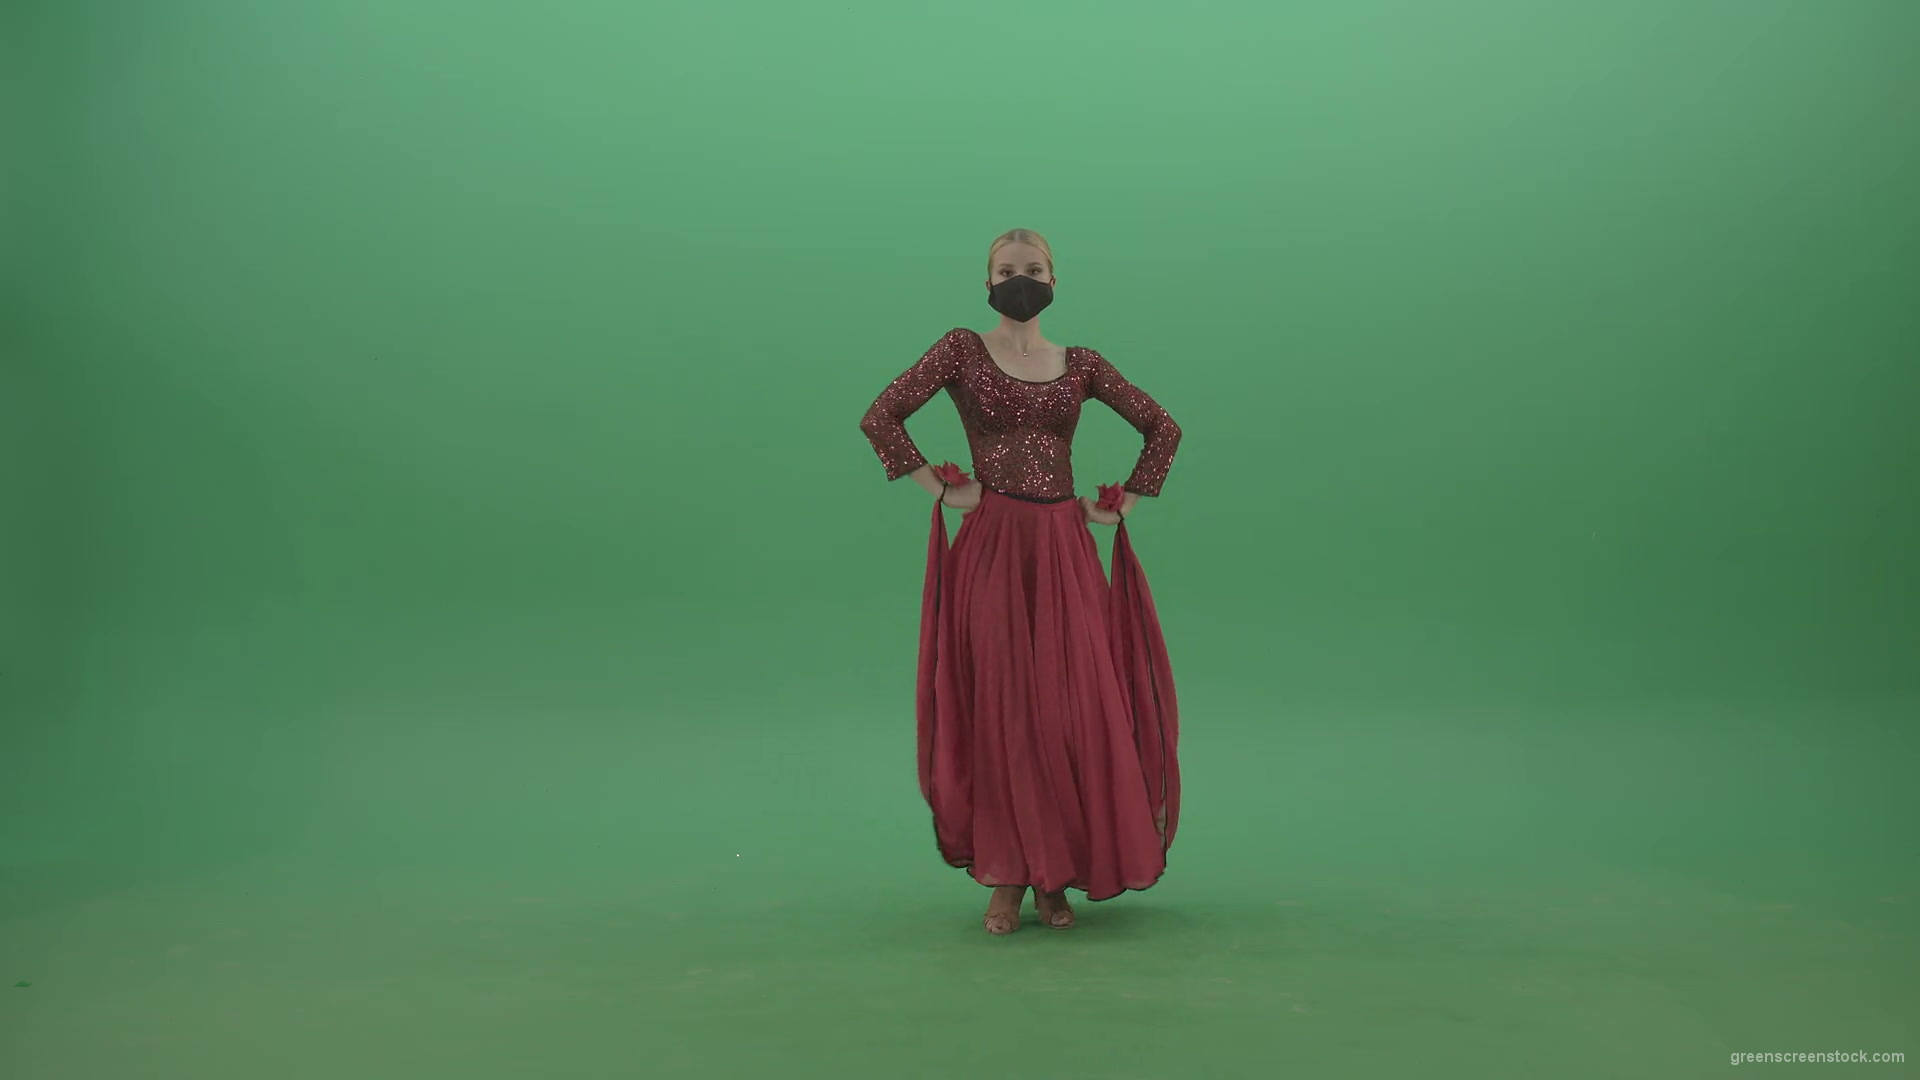 Beauty-Girl-with-black-mask-in-red-rumba-dress-waving-arms-isolated-on-green-screen-4K-Video-Footage-1920_008 Green Screen Stock